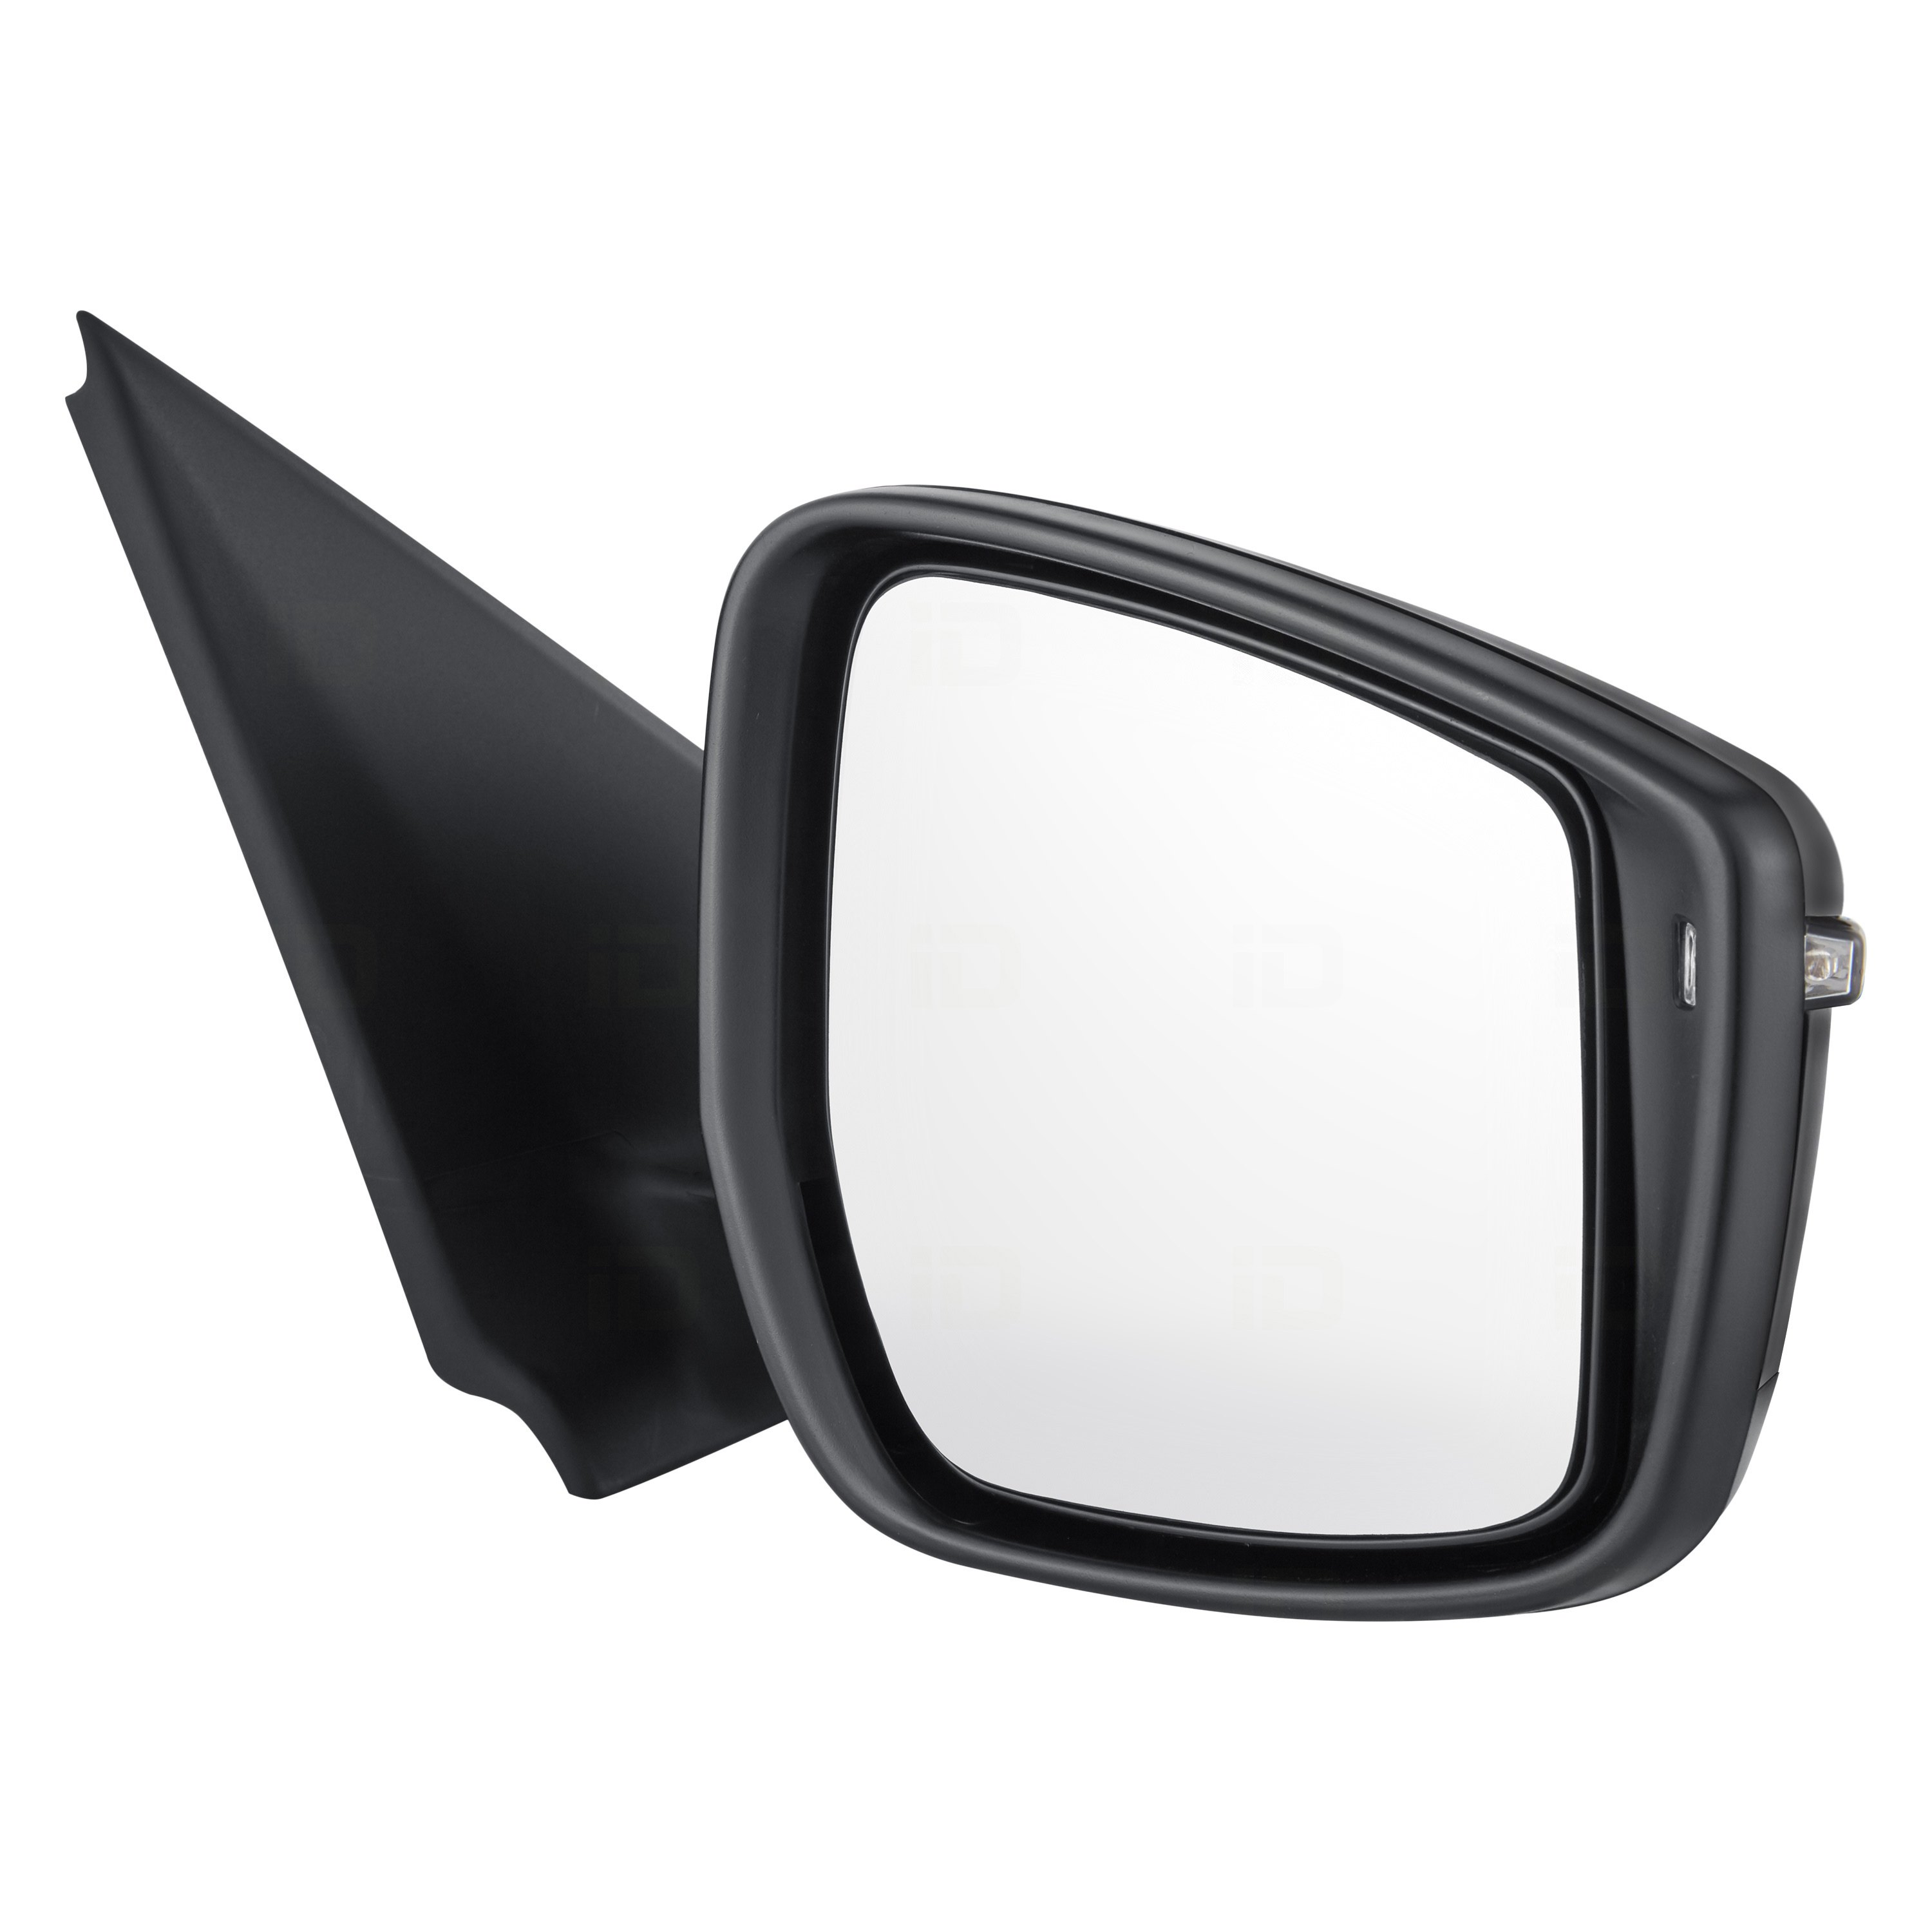 For Nissan Versa 2015-2019 Replace NI1321253 Passenger Side Power View Mirror | eBay 2015 Nissan Versa Driver Side Mirror Replacement